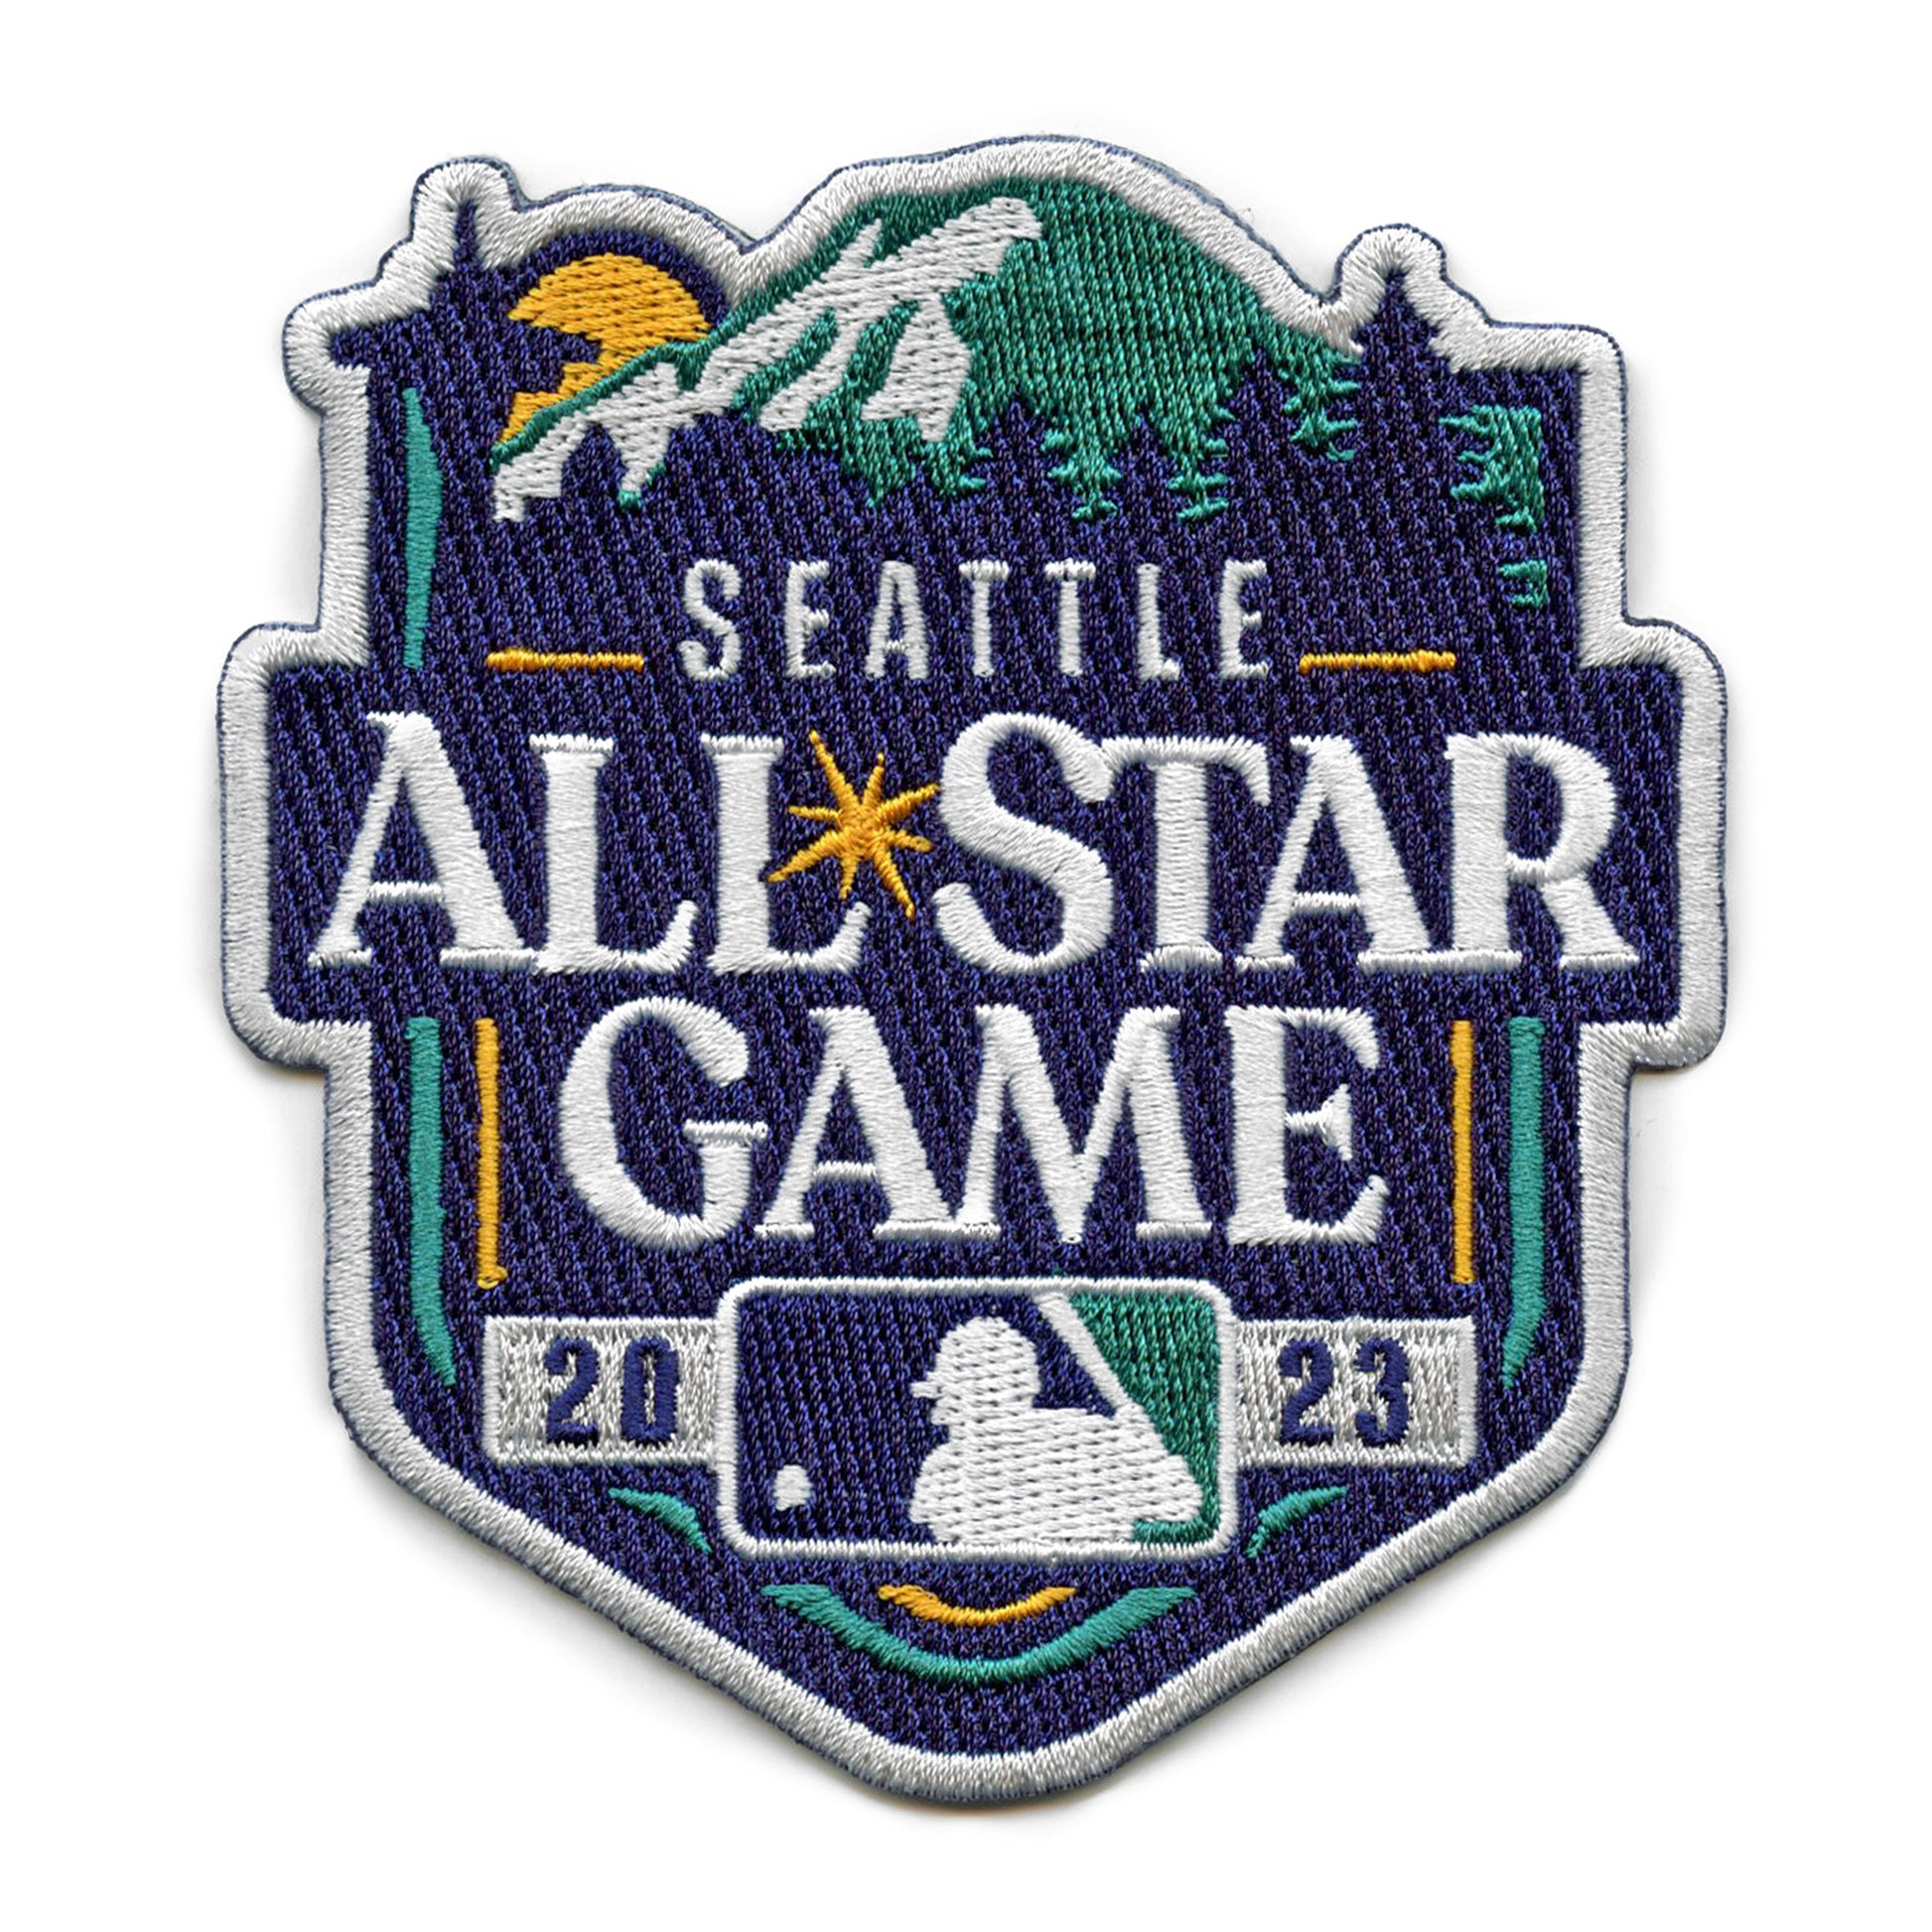 The patch for the 2023 All Star Game is seen on the jersey of